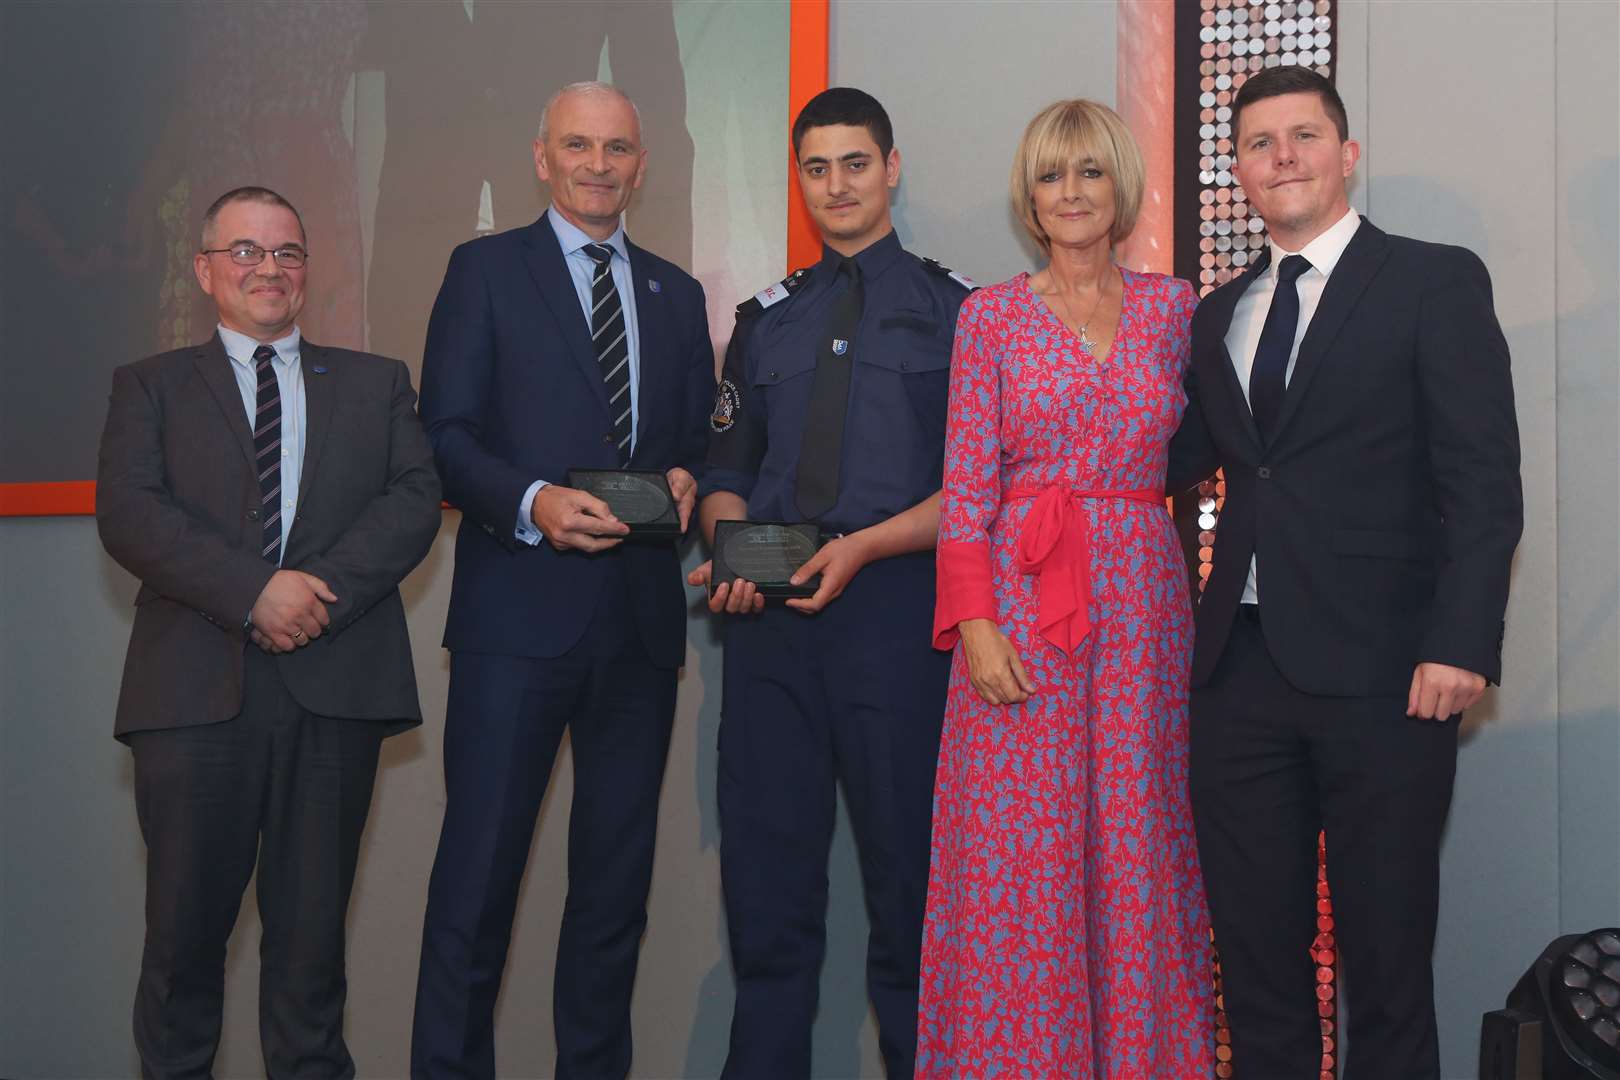 Tim Mann VPV and Nabil VPC leader at the British Security Awards 2019 accepting the National Partnership Award for the Next Generation in Security initiative between the Security Institute and Volunteer Police Cadets